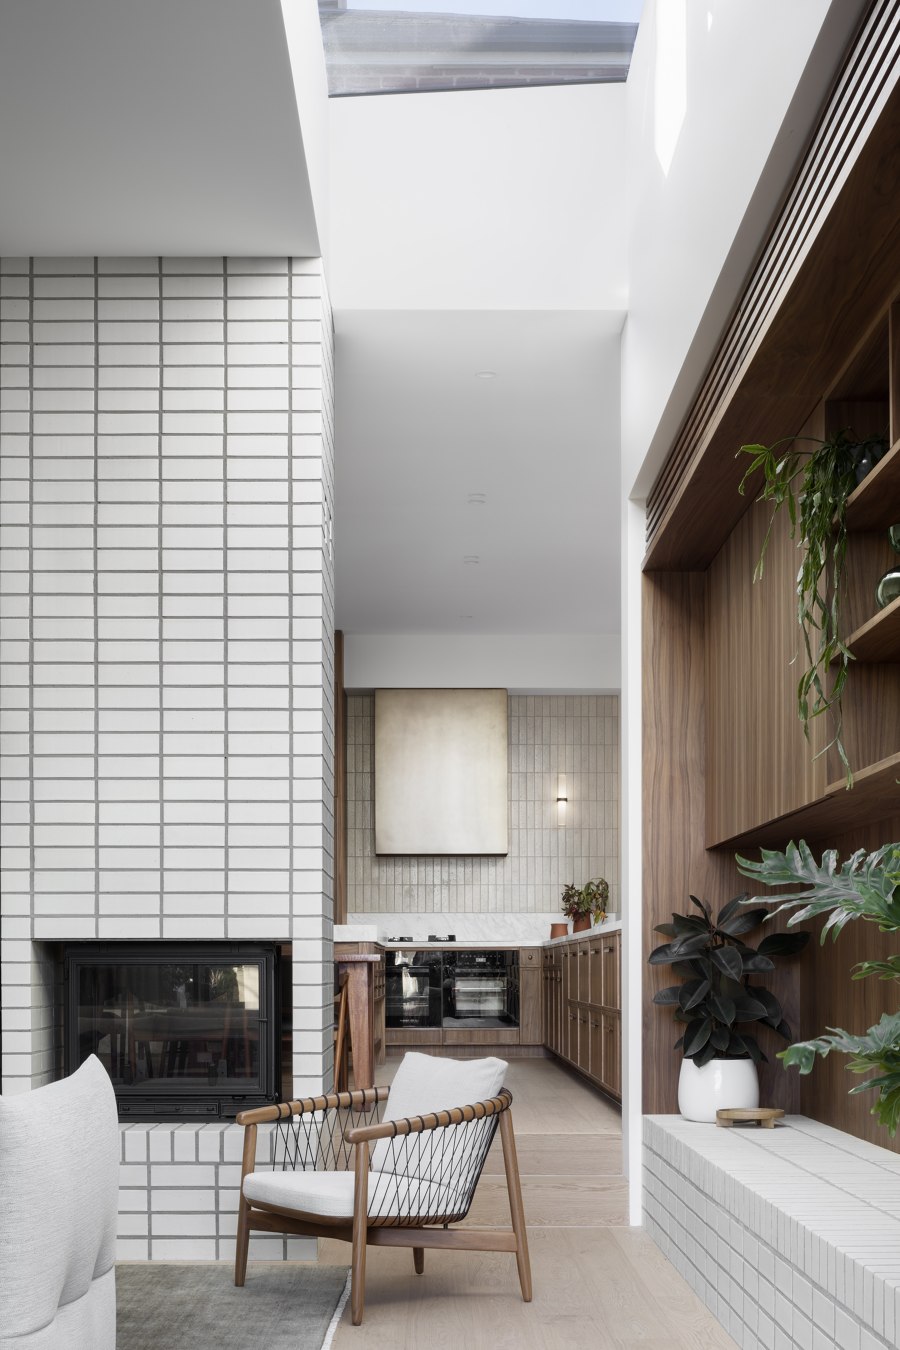 South Terrace House | Locali abitativi | Sanders & King and Chan Architecture